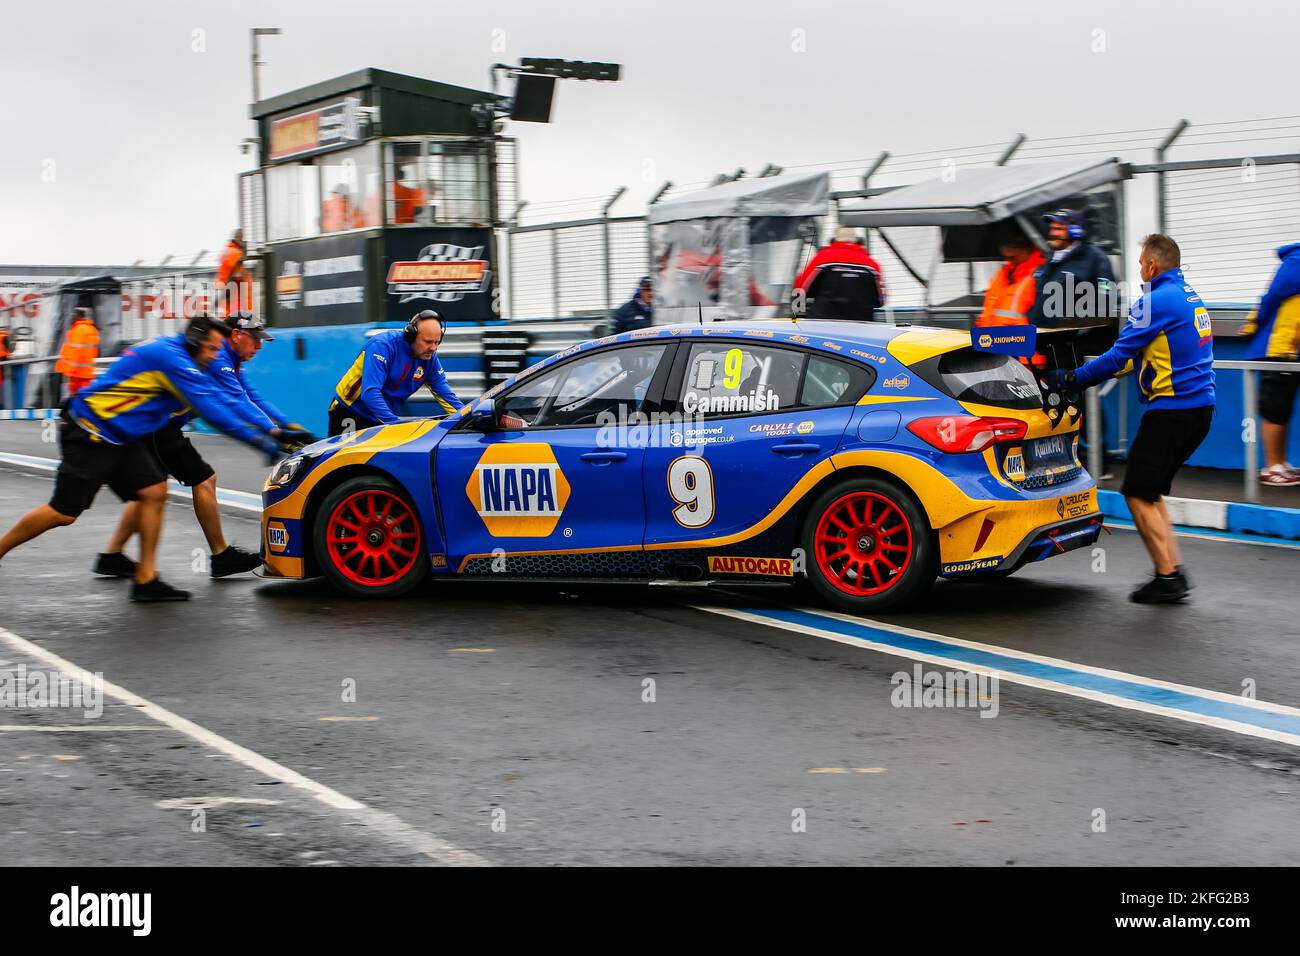 9 Dan Camish NAPA Racing UK Ford Focus during Round 16, 17 and 18 of the British Touring Championship at Knockhill, Fife, Scotland, United Kingdom Stock Photo